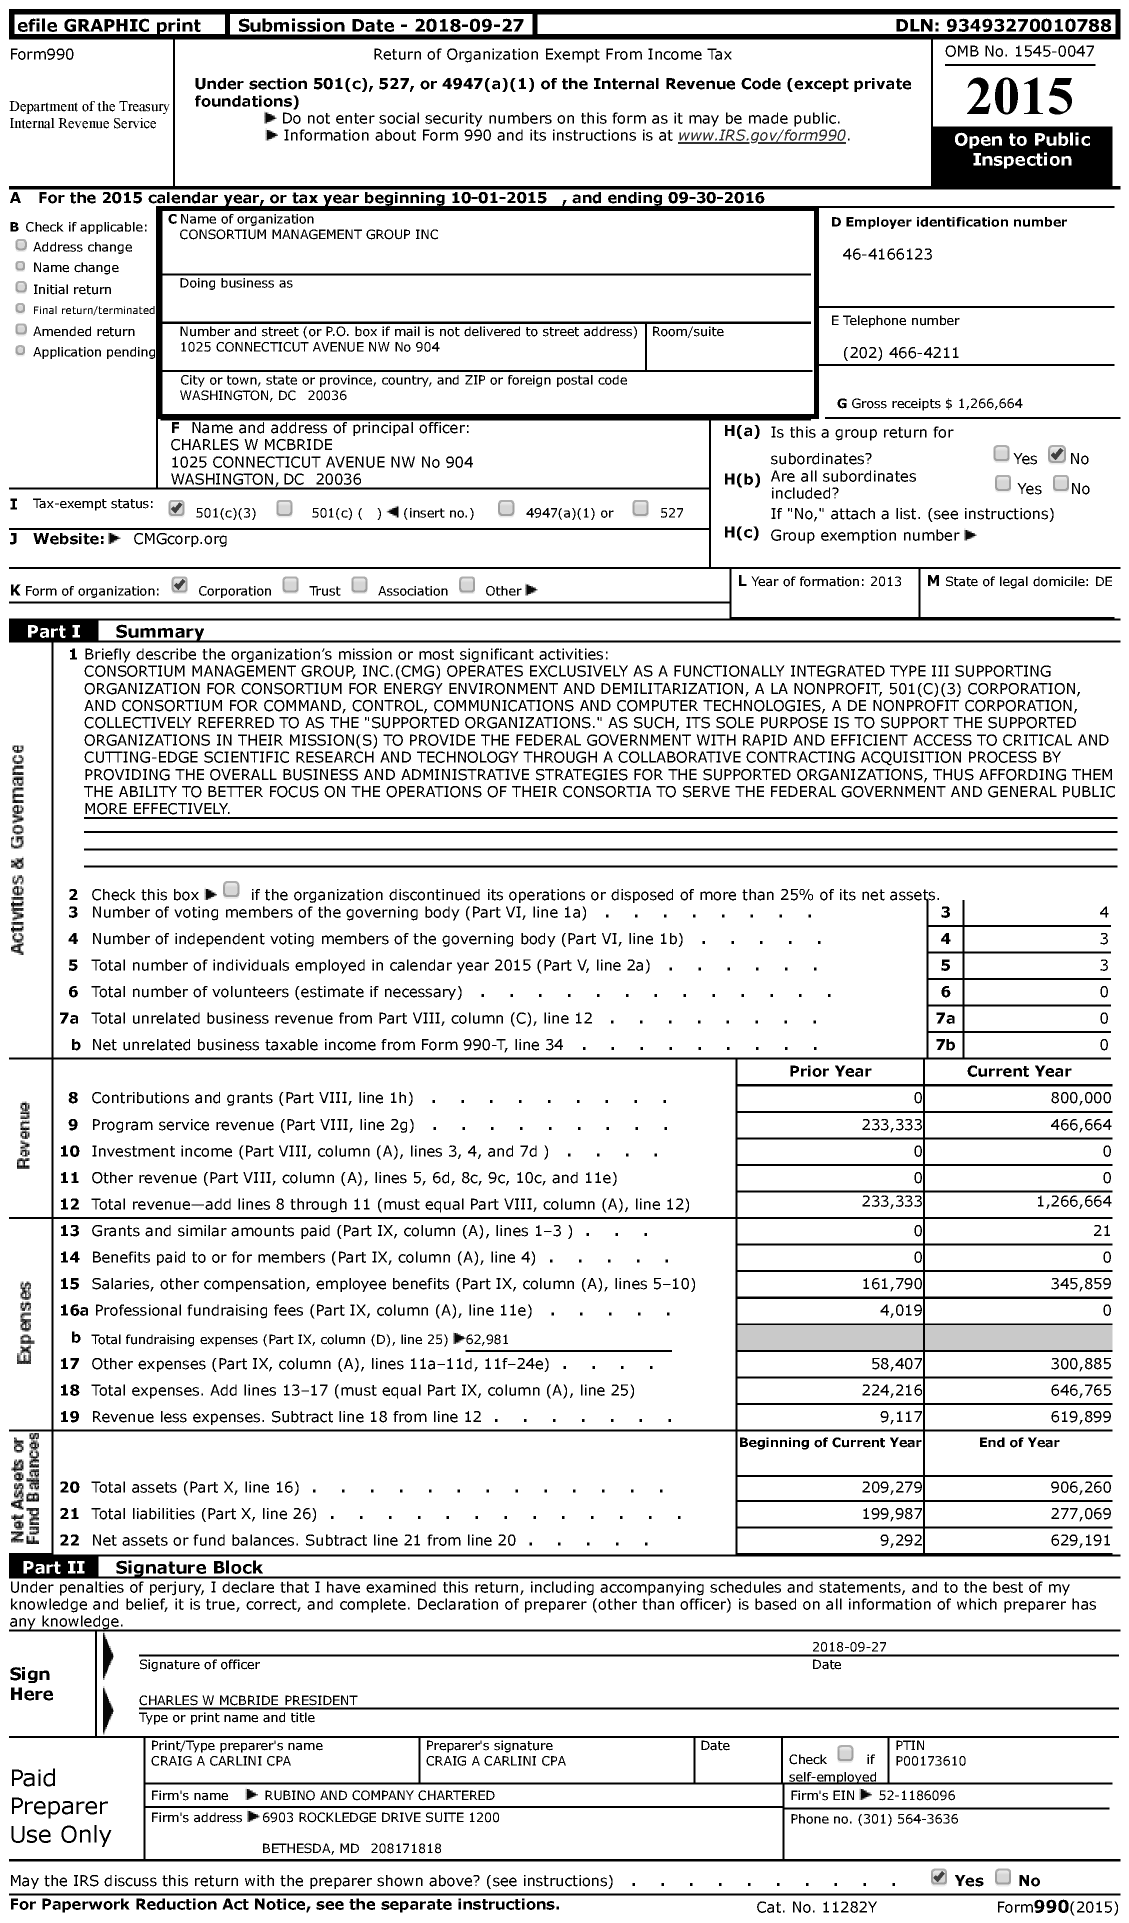 Image of first page of 2015 Form 990 for Consortium Management Group